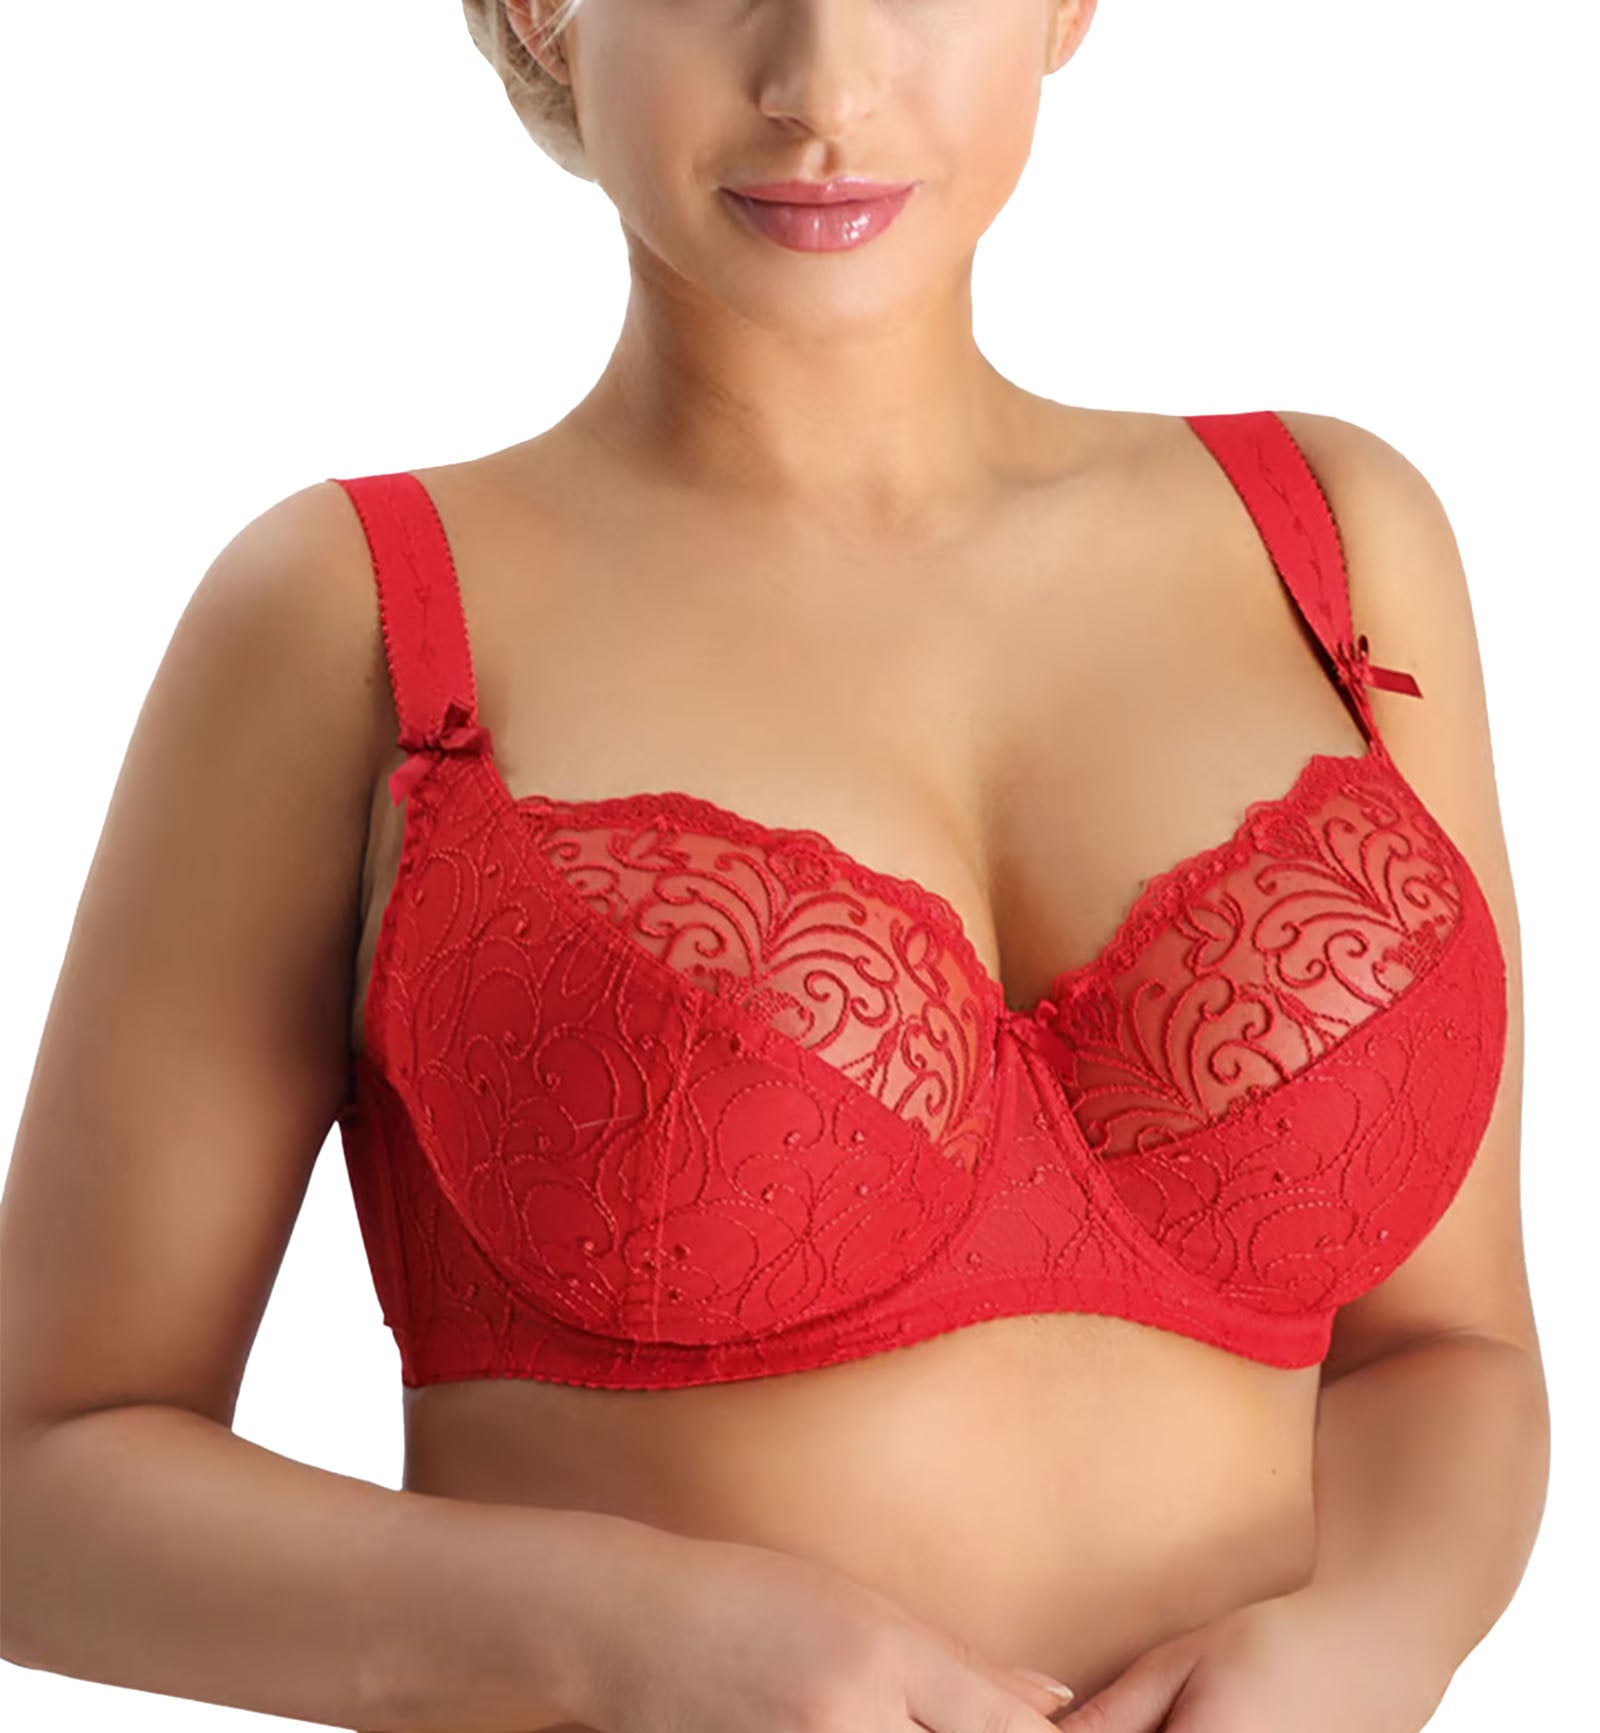 Full Cup Bras - Fantasie, Elomi, Wacoal – Tagged size-34h–